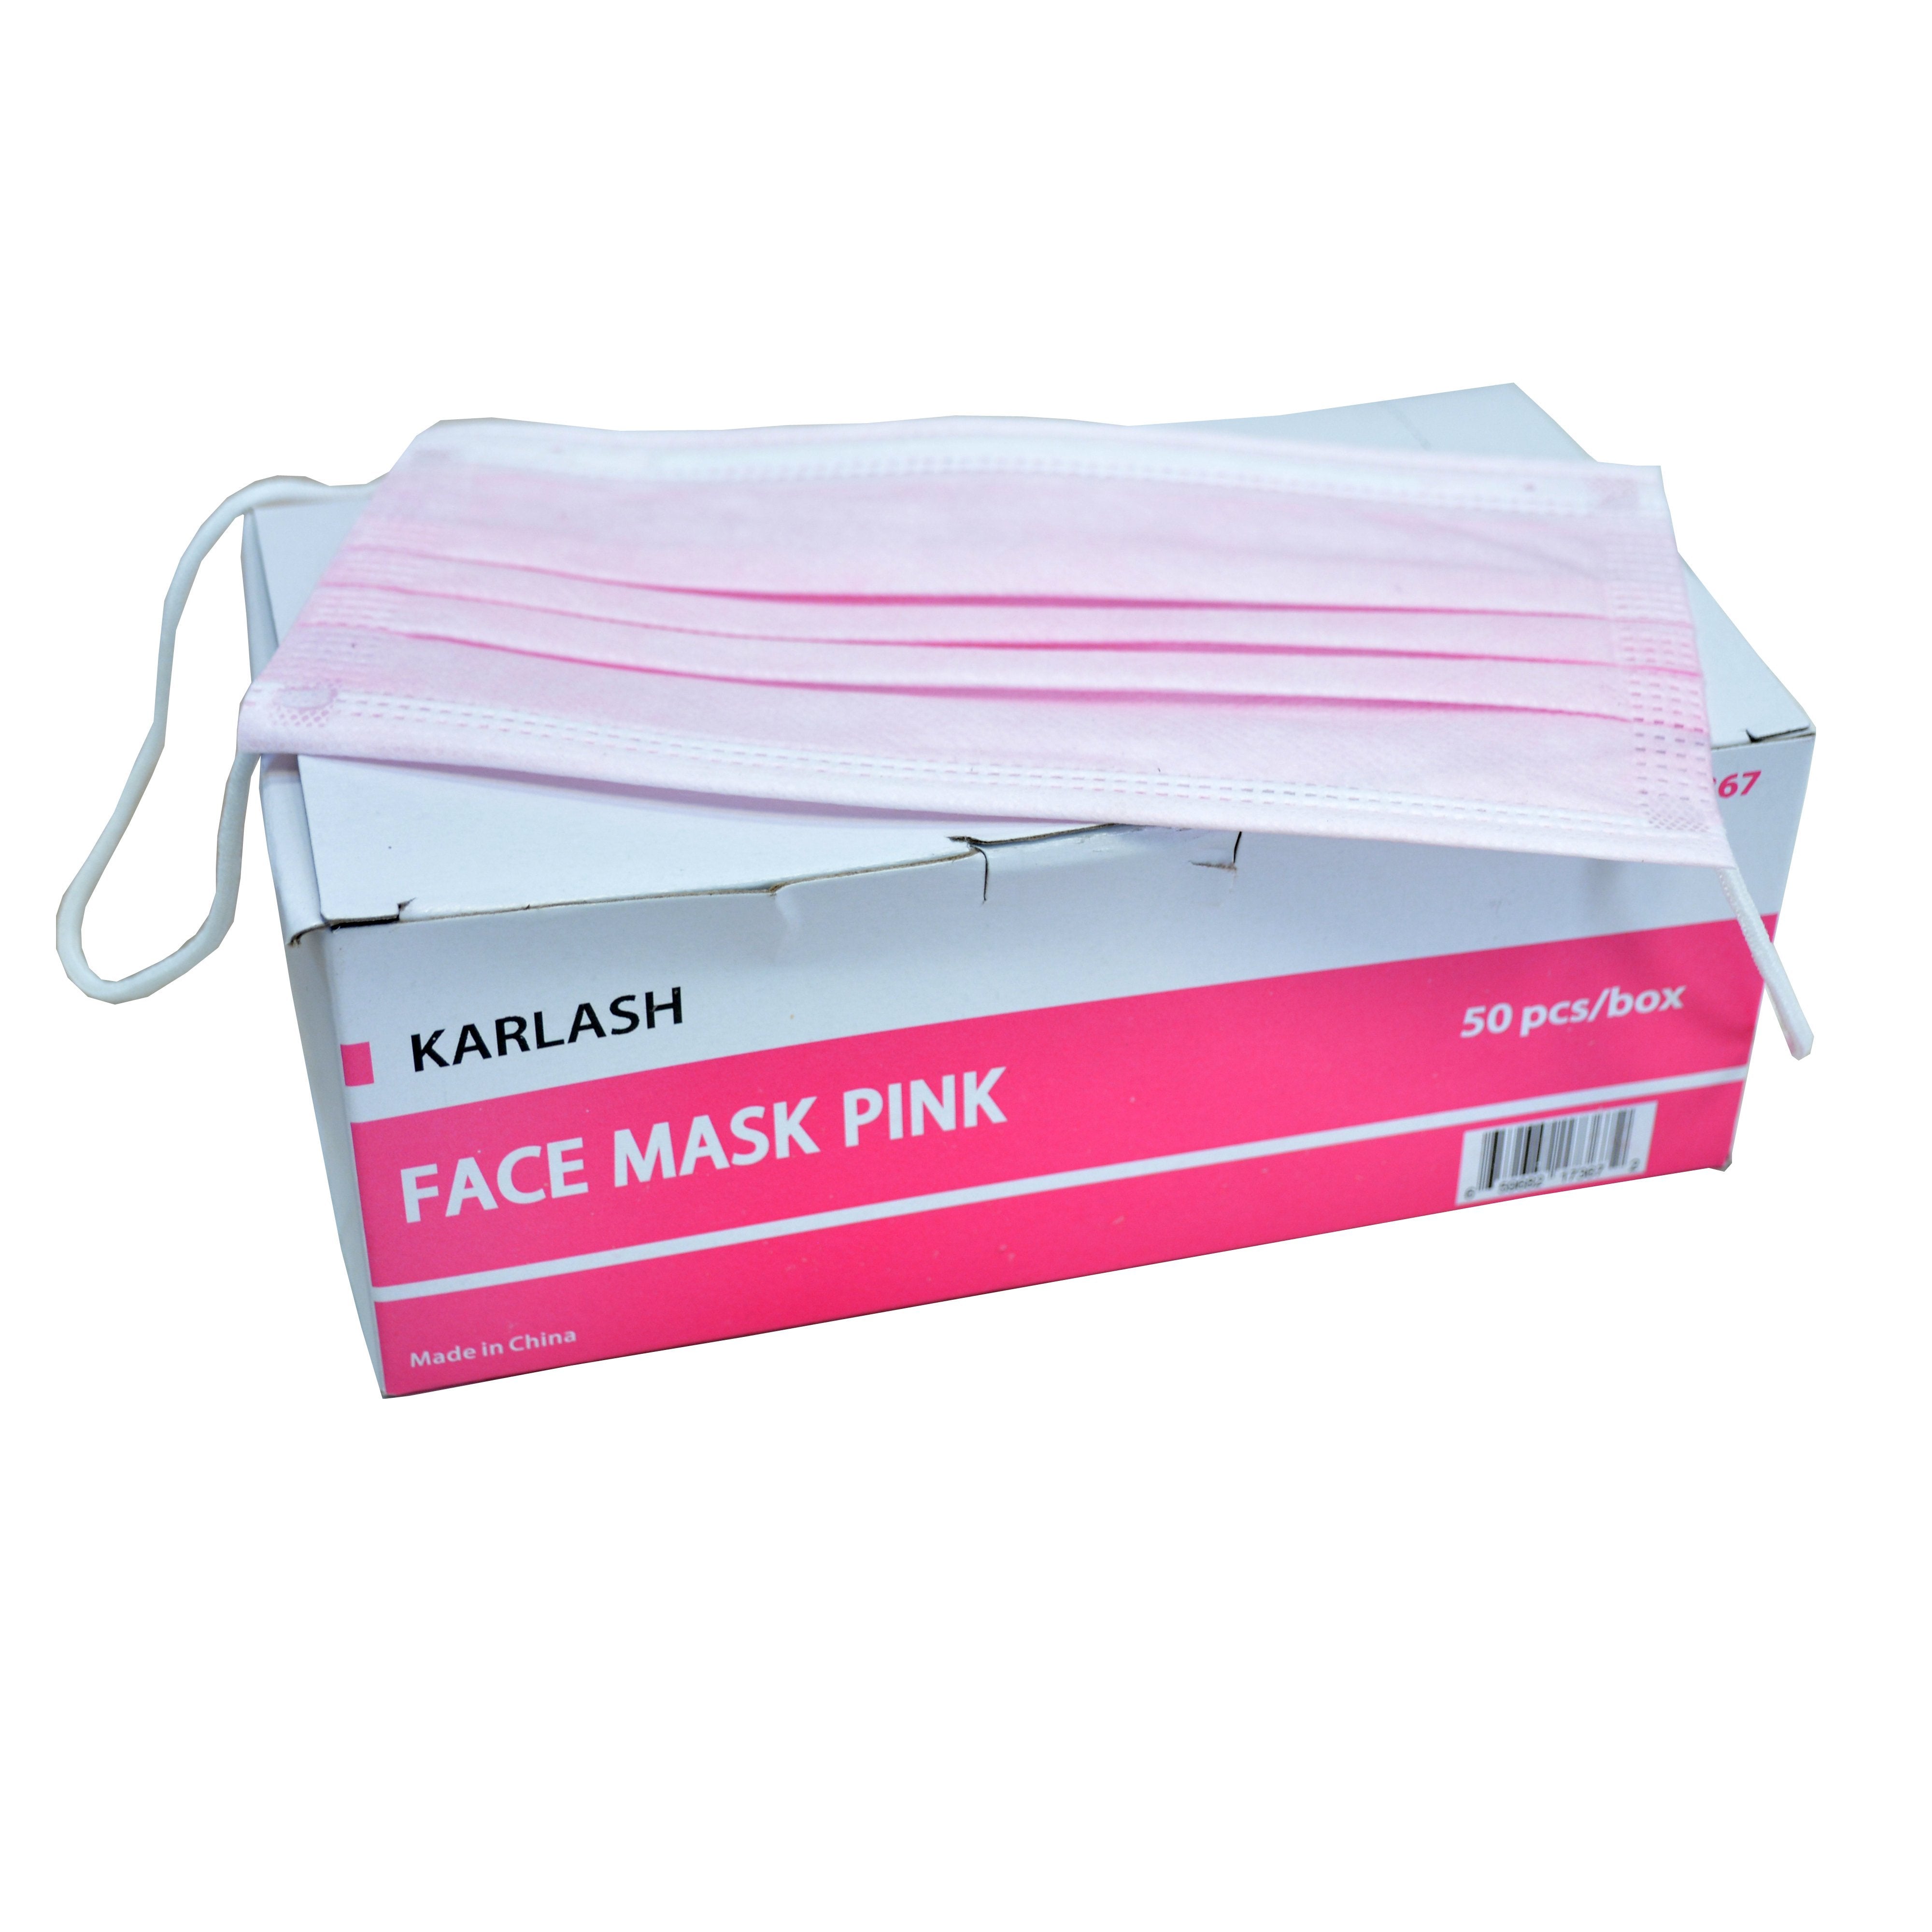 Karlash Four Layer 4-Ply Disposable Earloop Face Mask Filter Antivirus Bacteria Pink - 50 Pieces